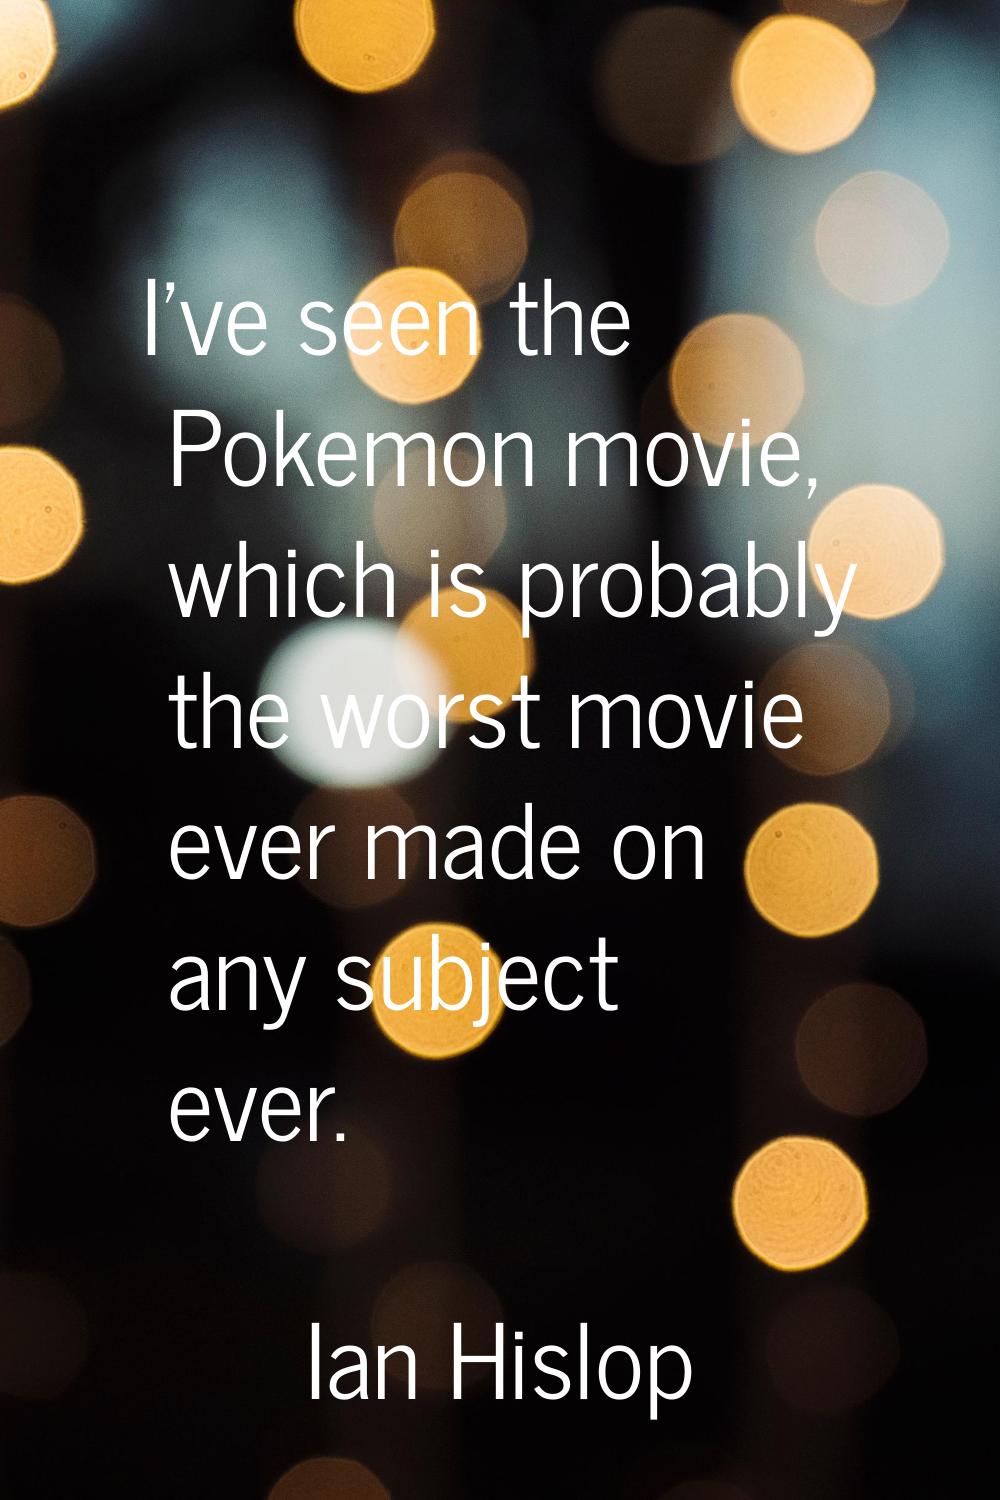 I've seen the Pokemon movie, which is probably the worst movie ever made on any subject ever.